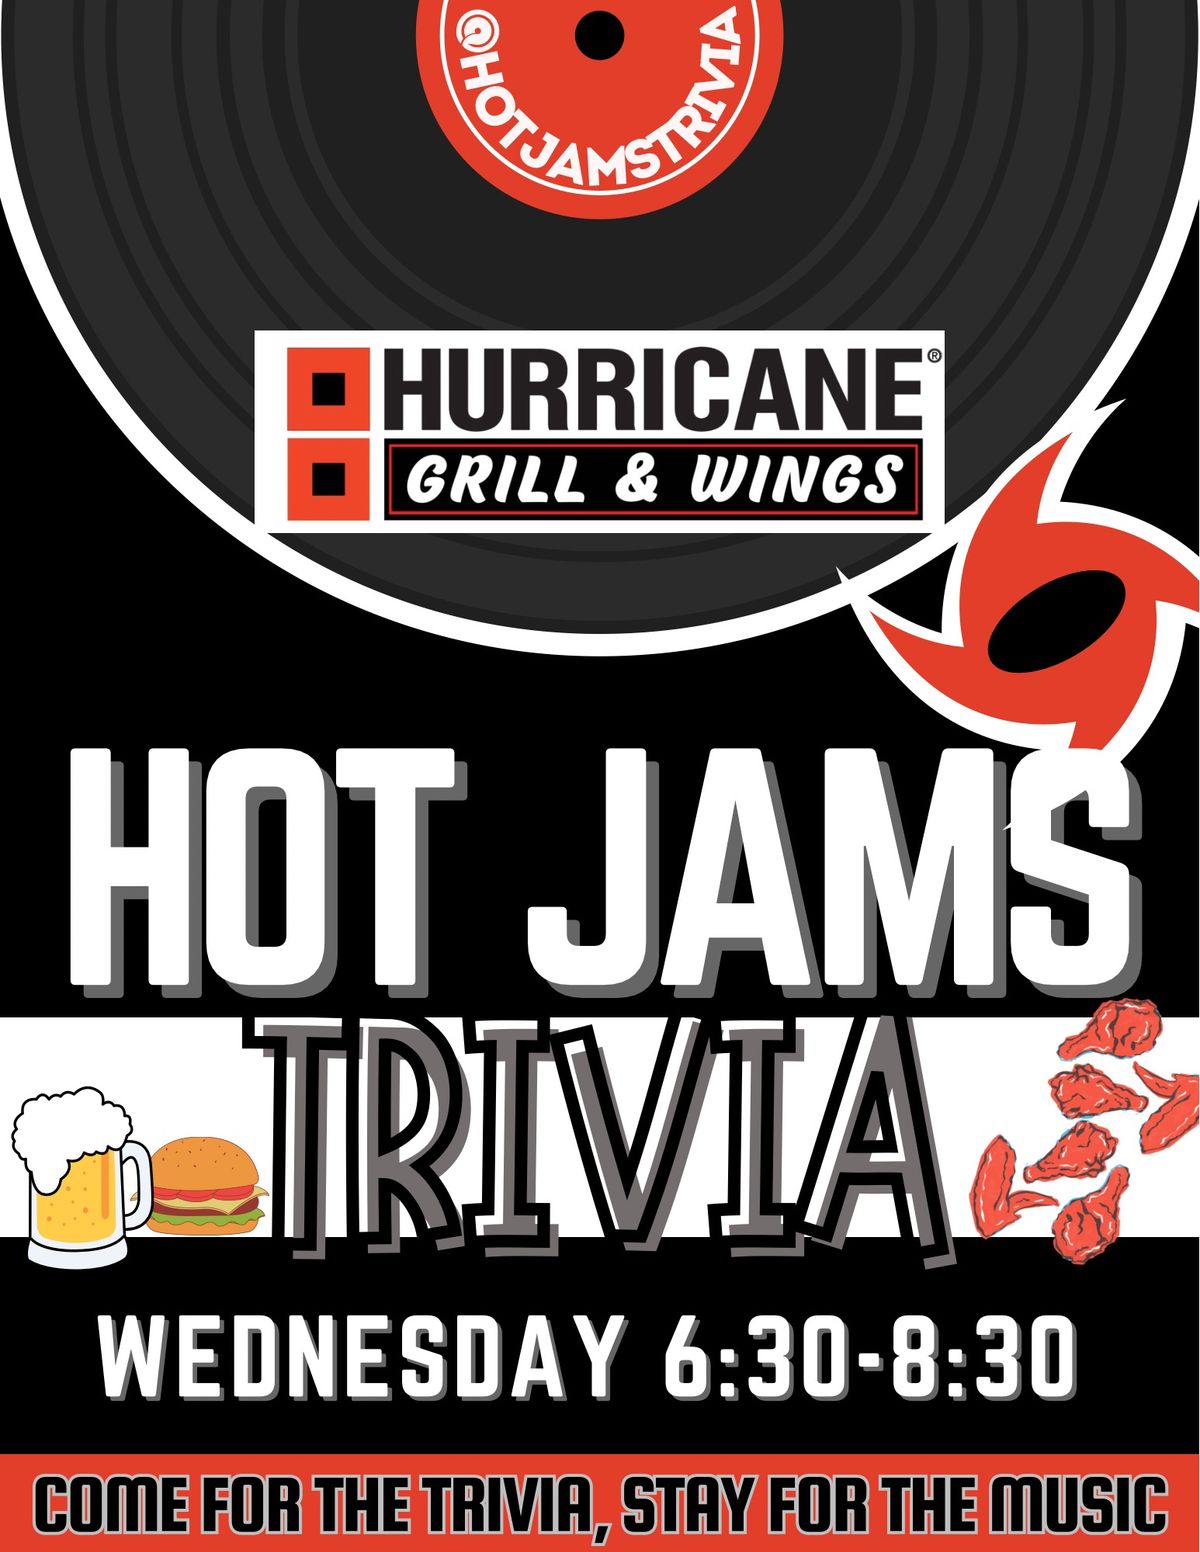 Trivia night at Hurricane grill & wings